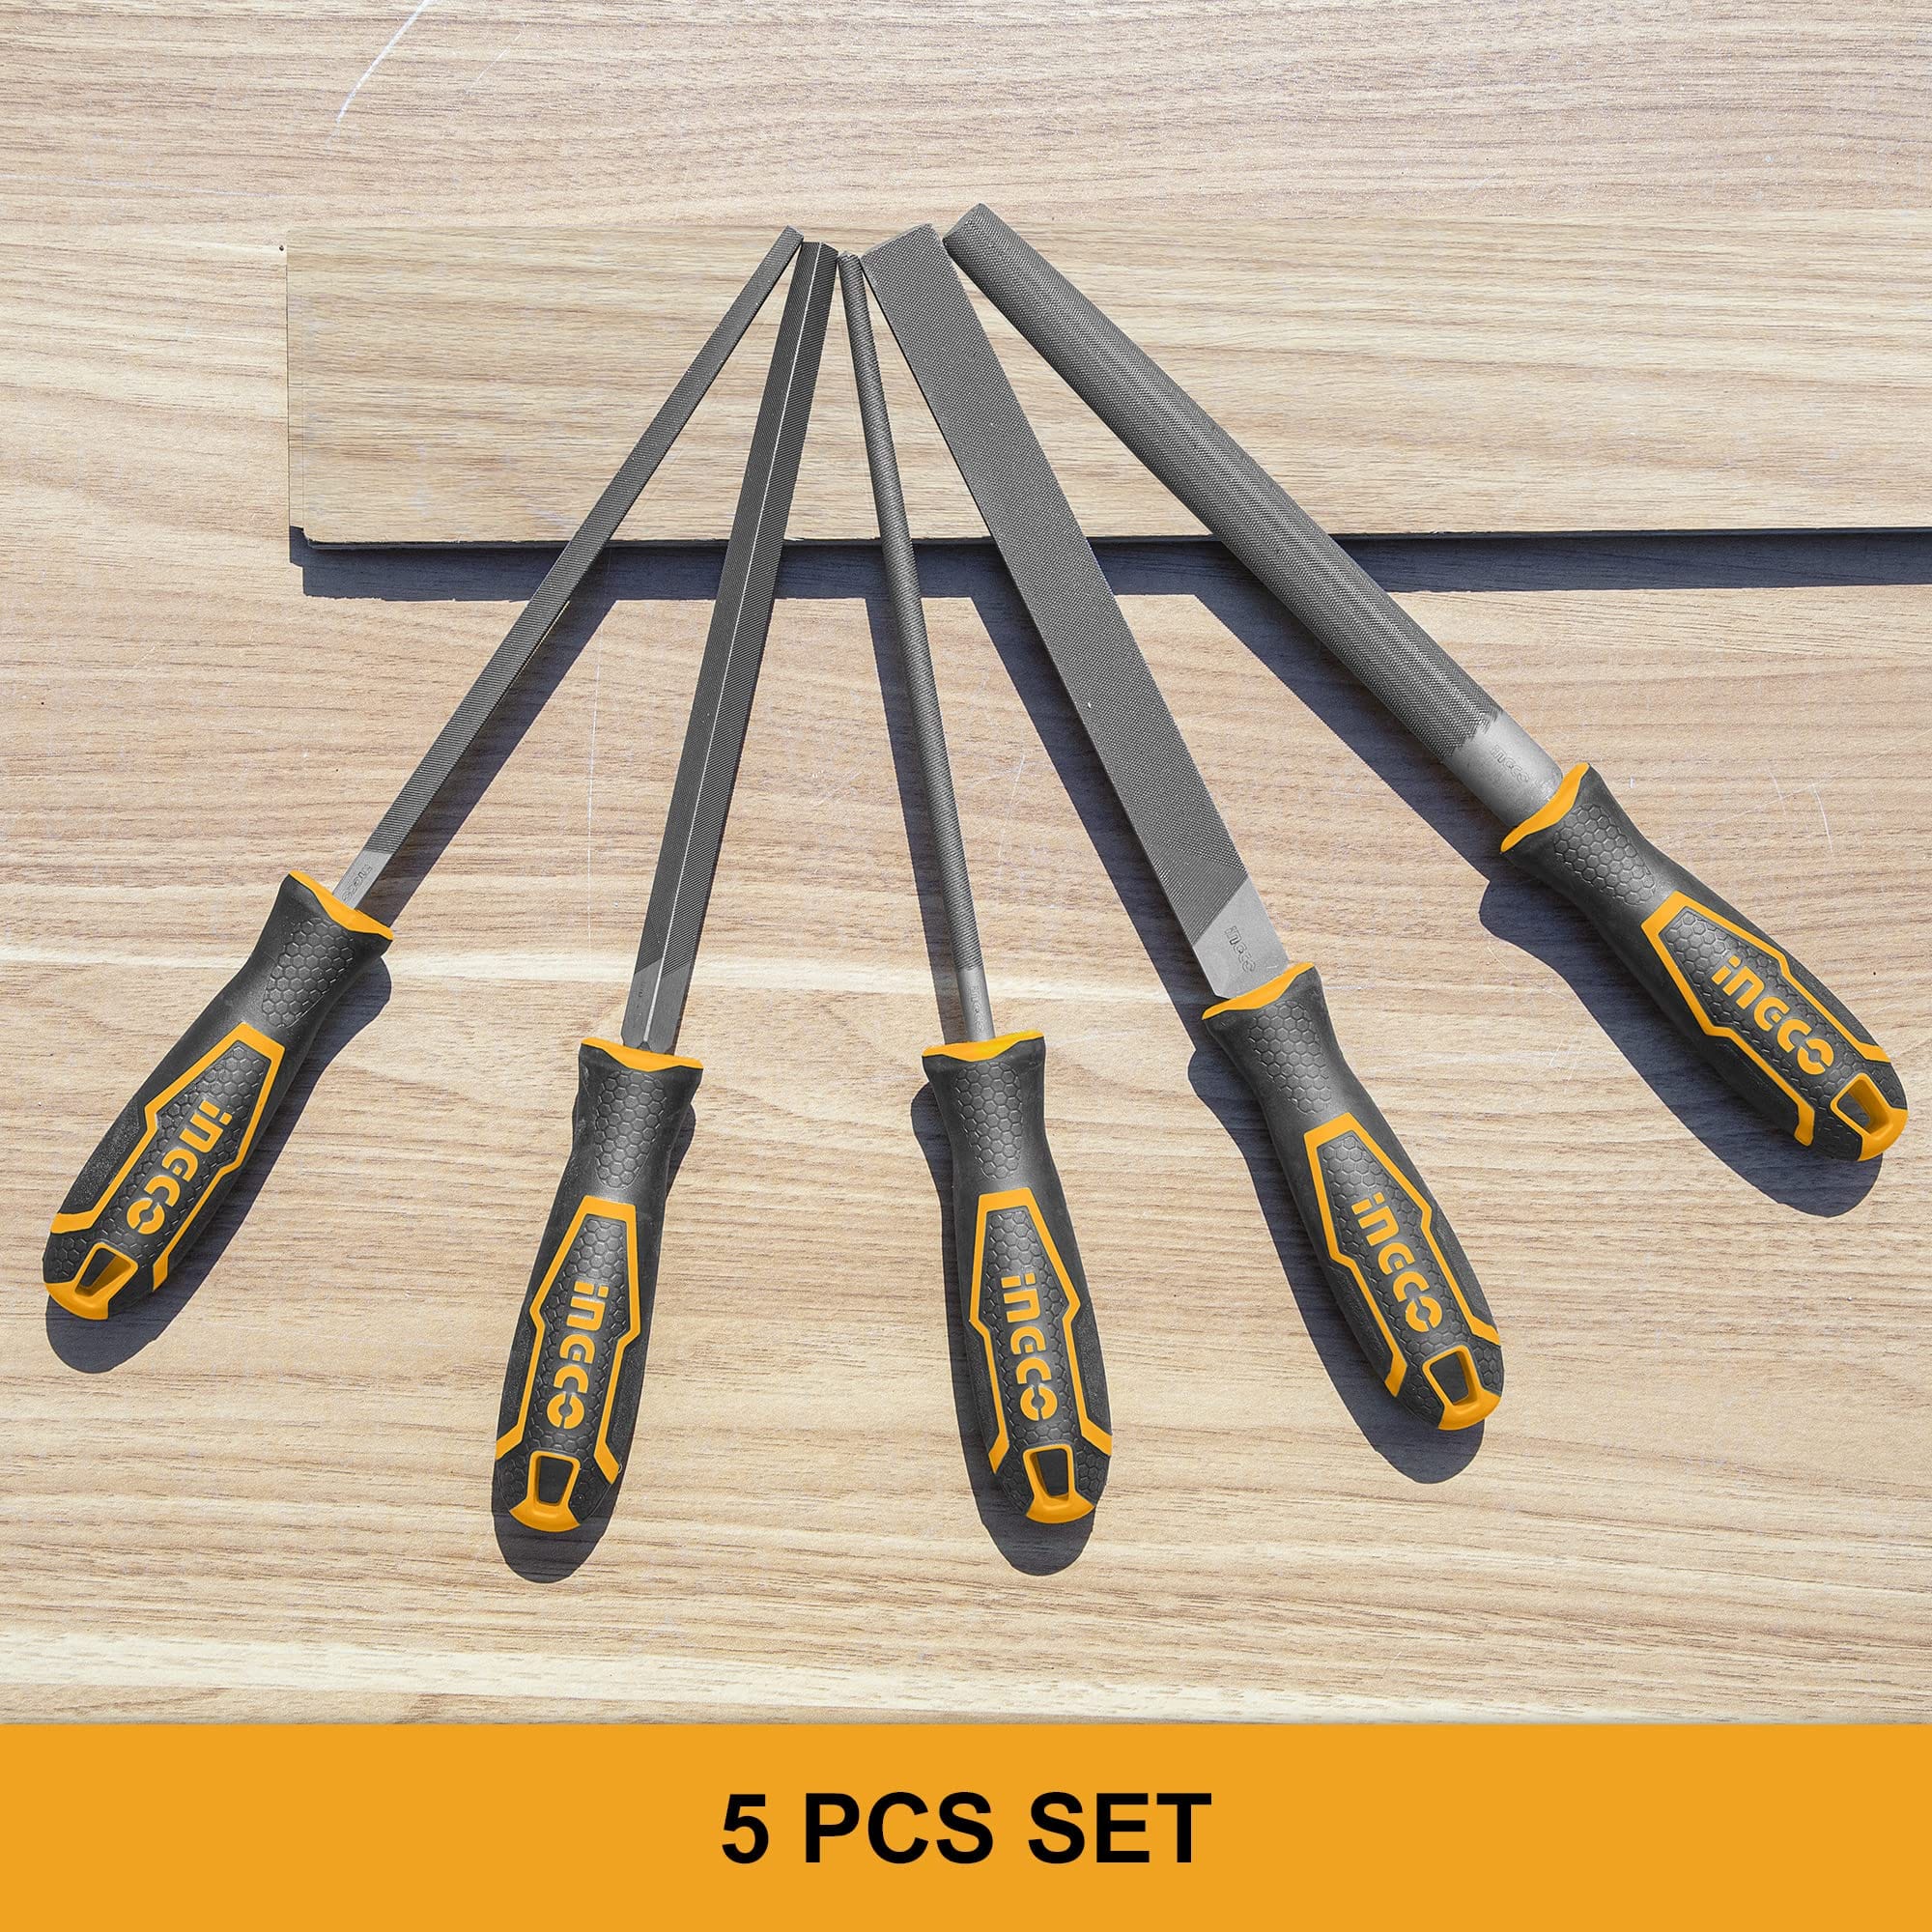 Ingco 8" 5 Pieces Steel File Set - HKTFS0508 | Supply Master | Accra, Ghana Chisels Files Planes & Punches Buy Tools hardware Building materials